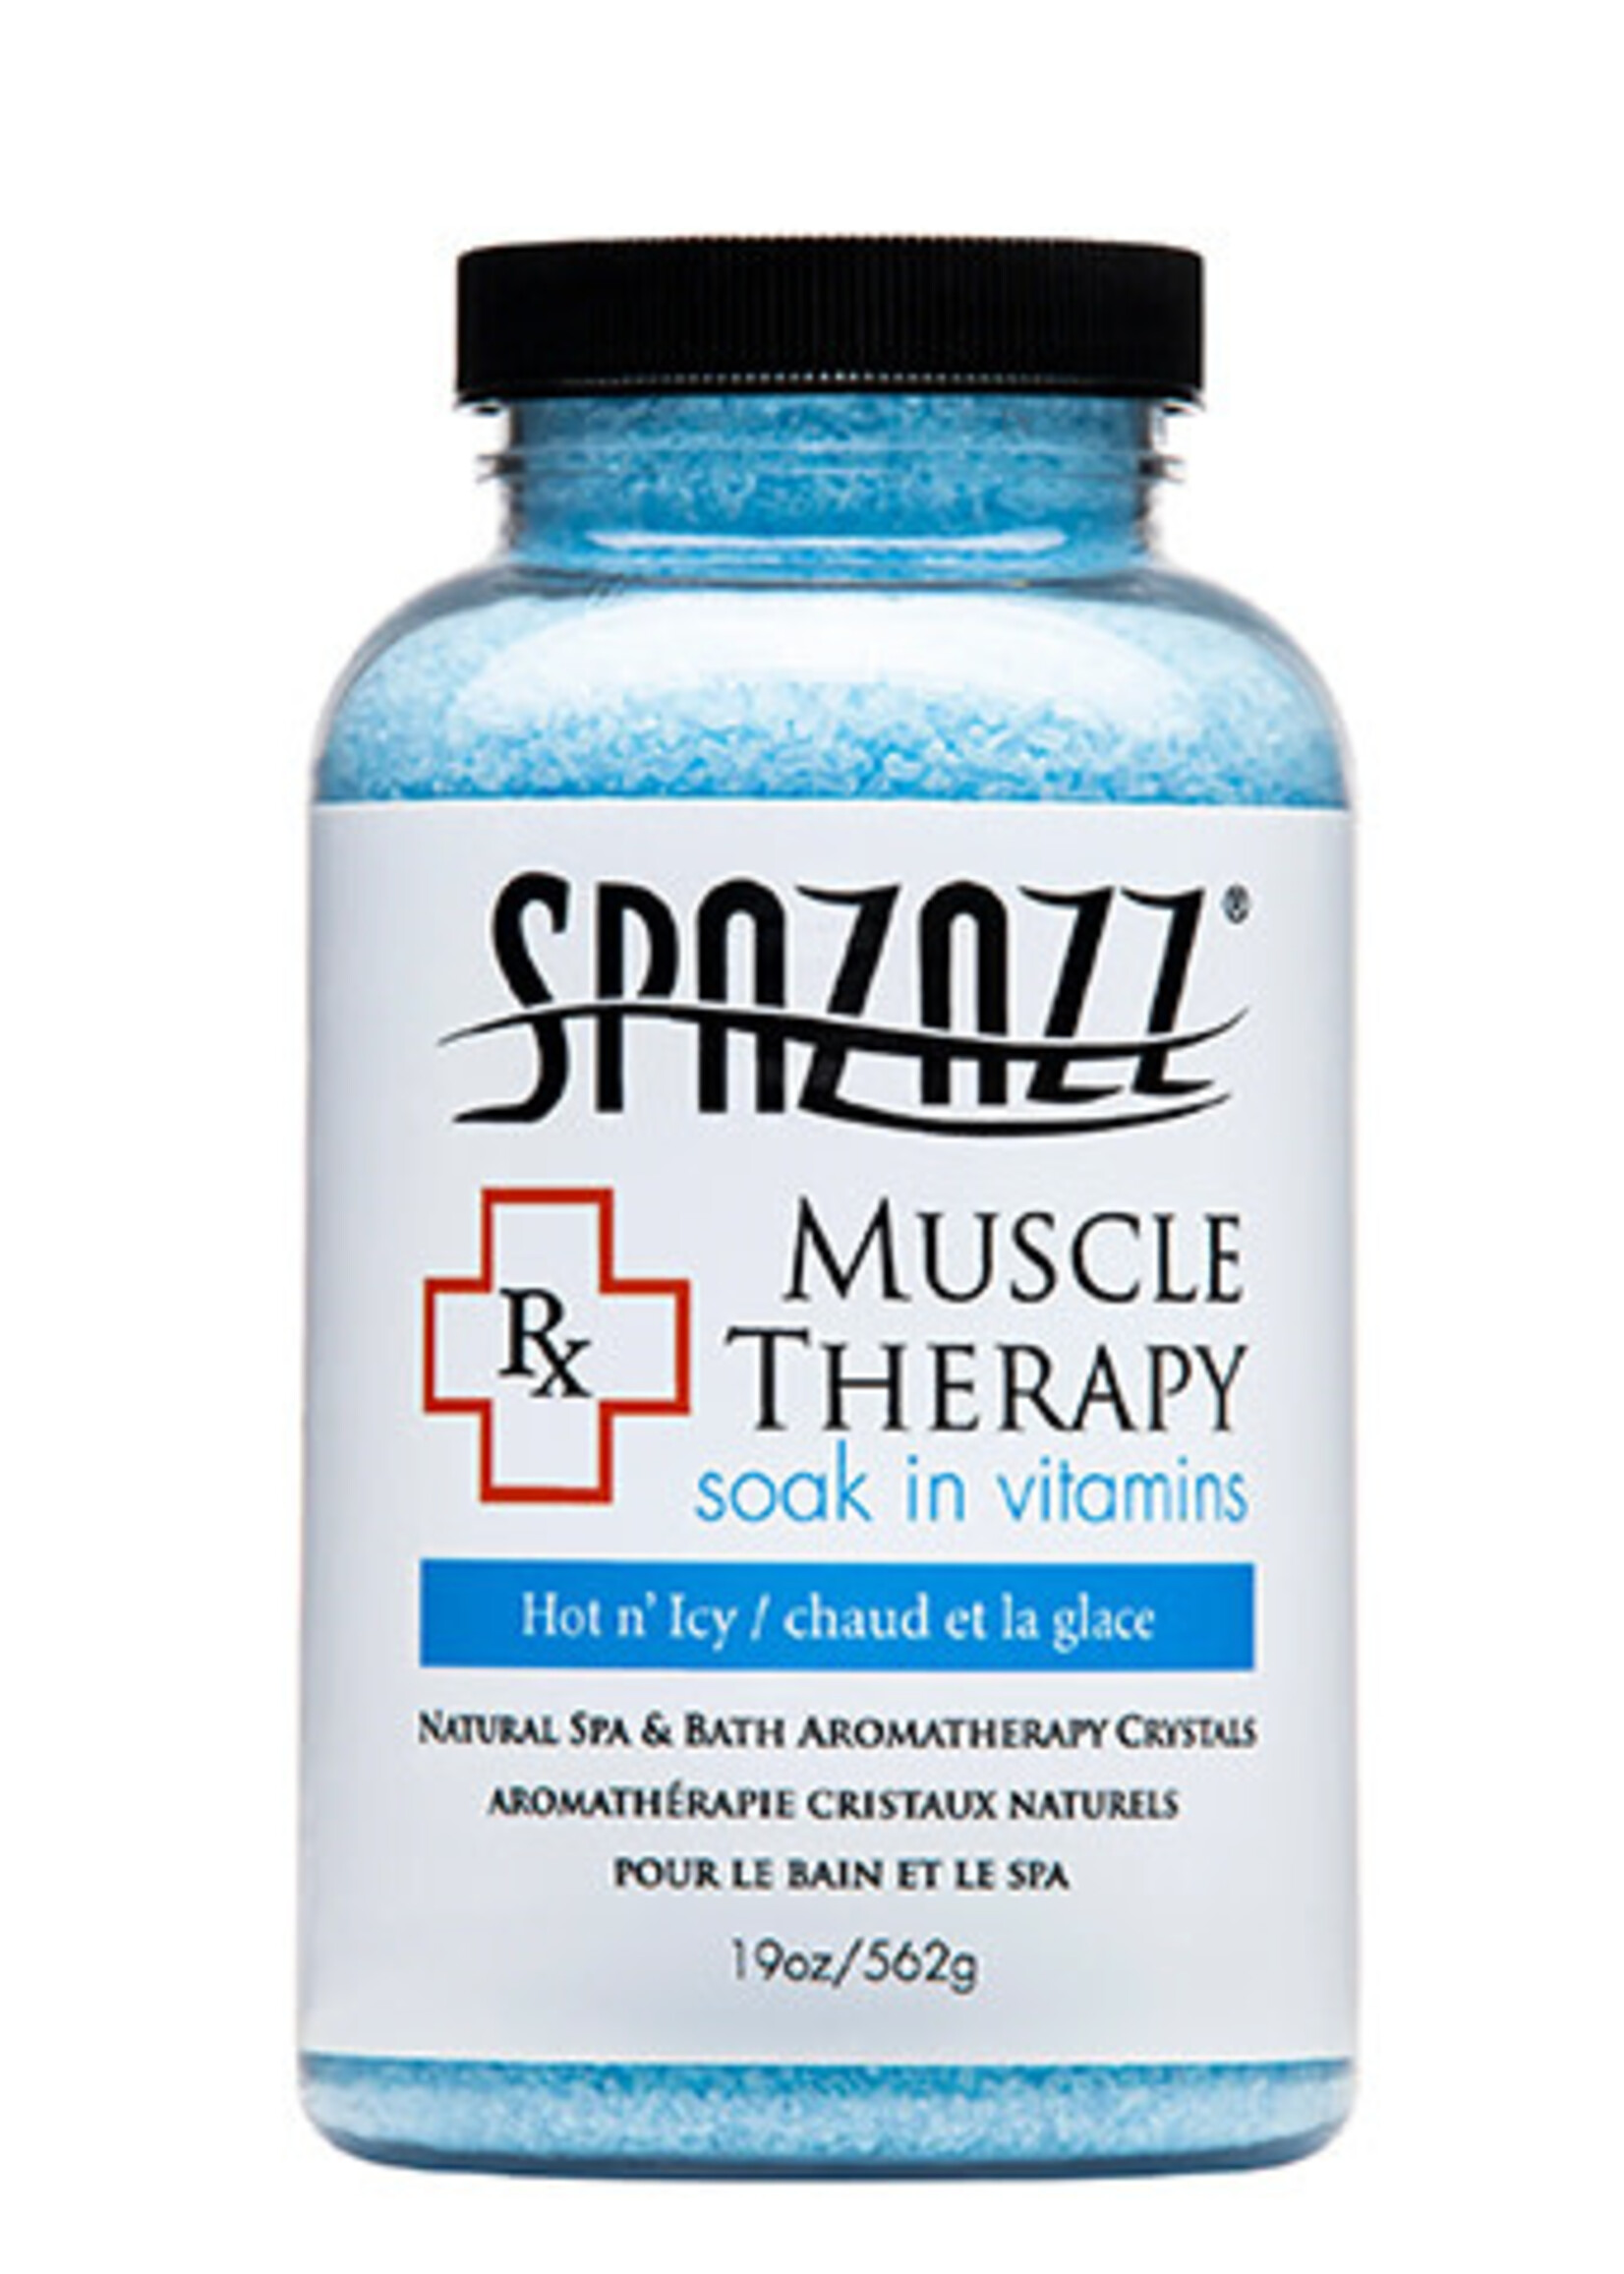 Spazazz Spazazz Rx Muscle Therapy Hot n' Icy 19Oz